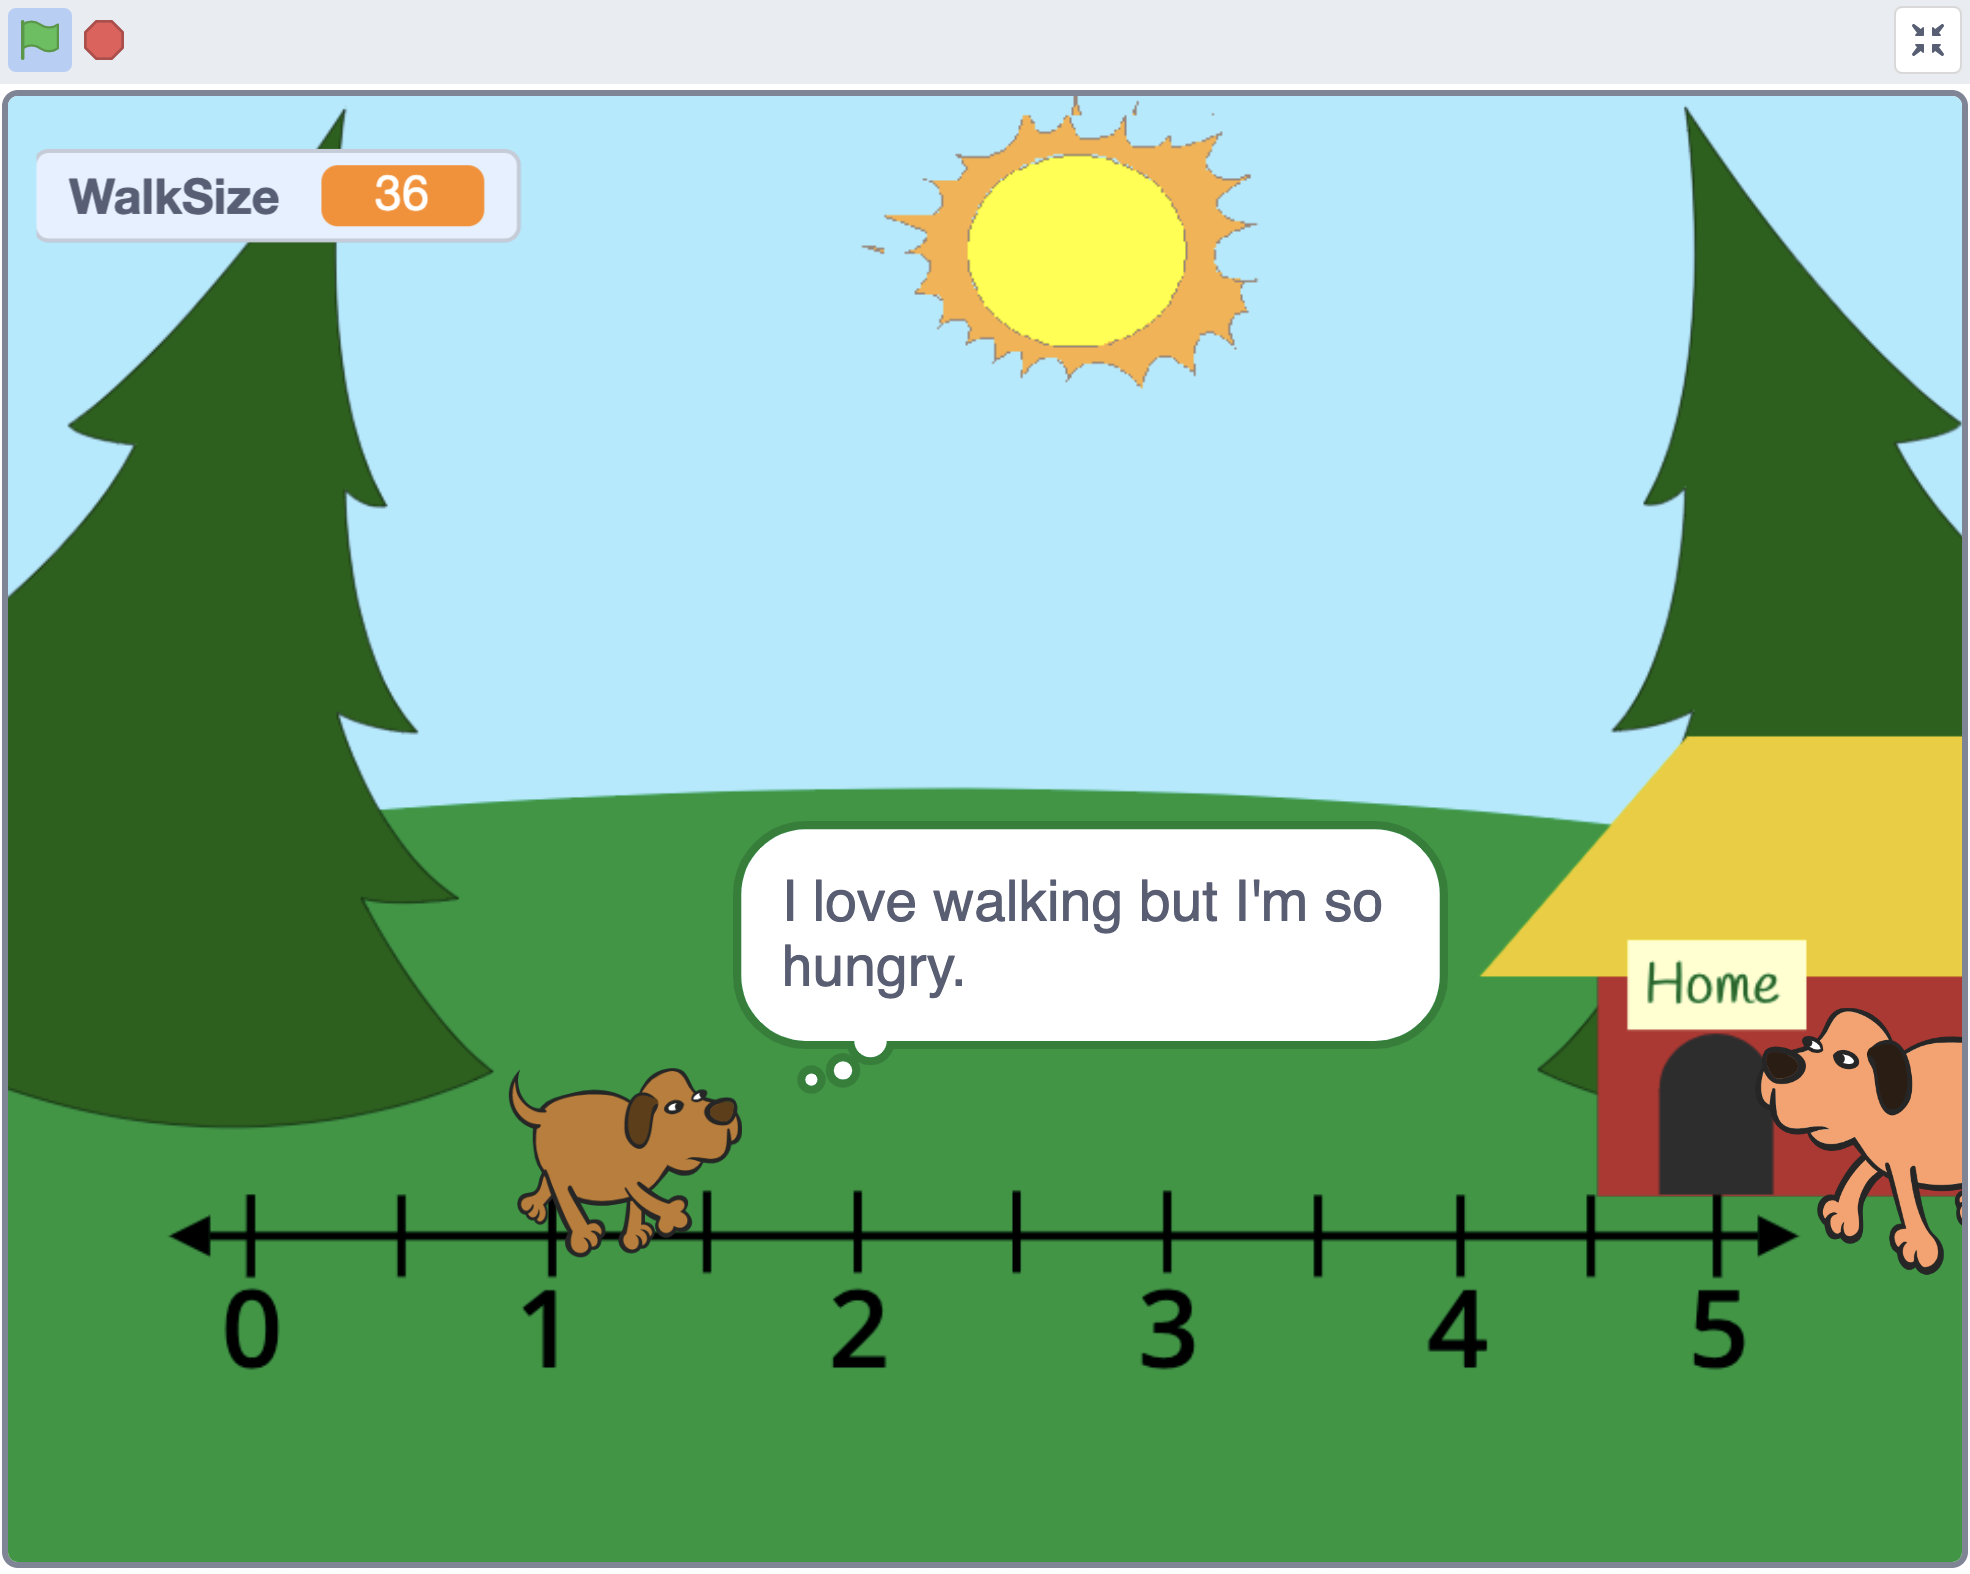 Scratch project stage depicting an outdoor setting with a house at the end of a number line. One dog walks over the number line towards another dog at the end near the house.